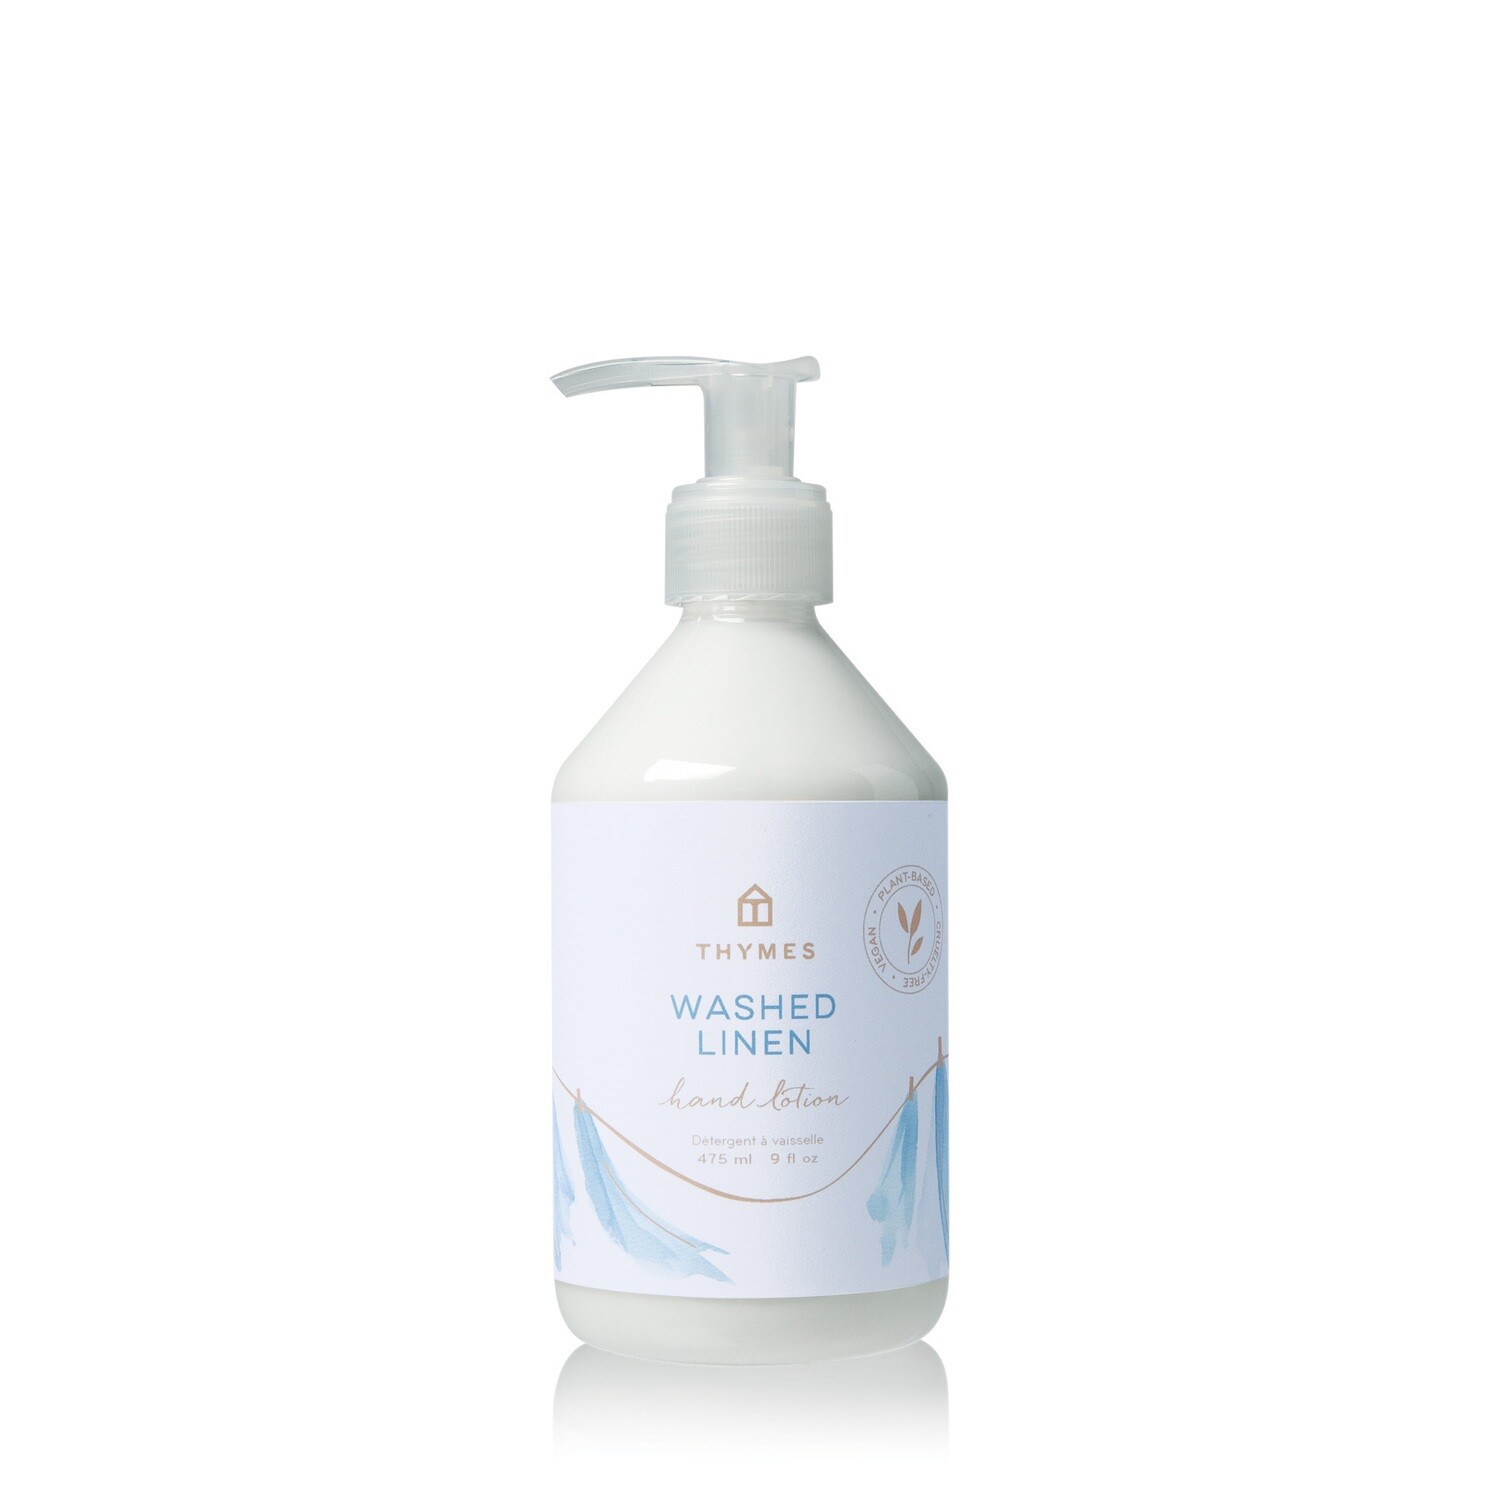 Washed Linen Hand Lotion 8.25 oz